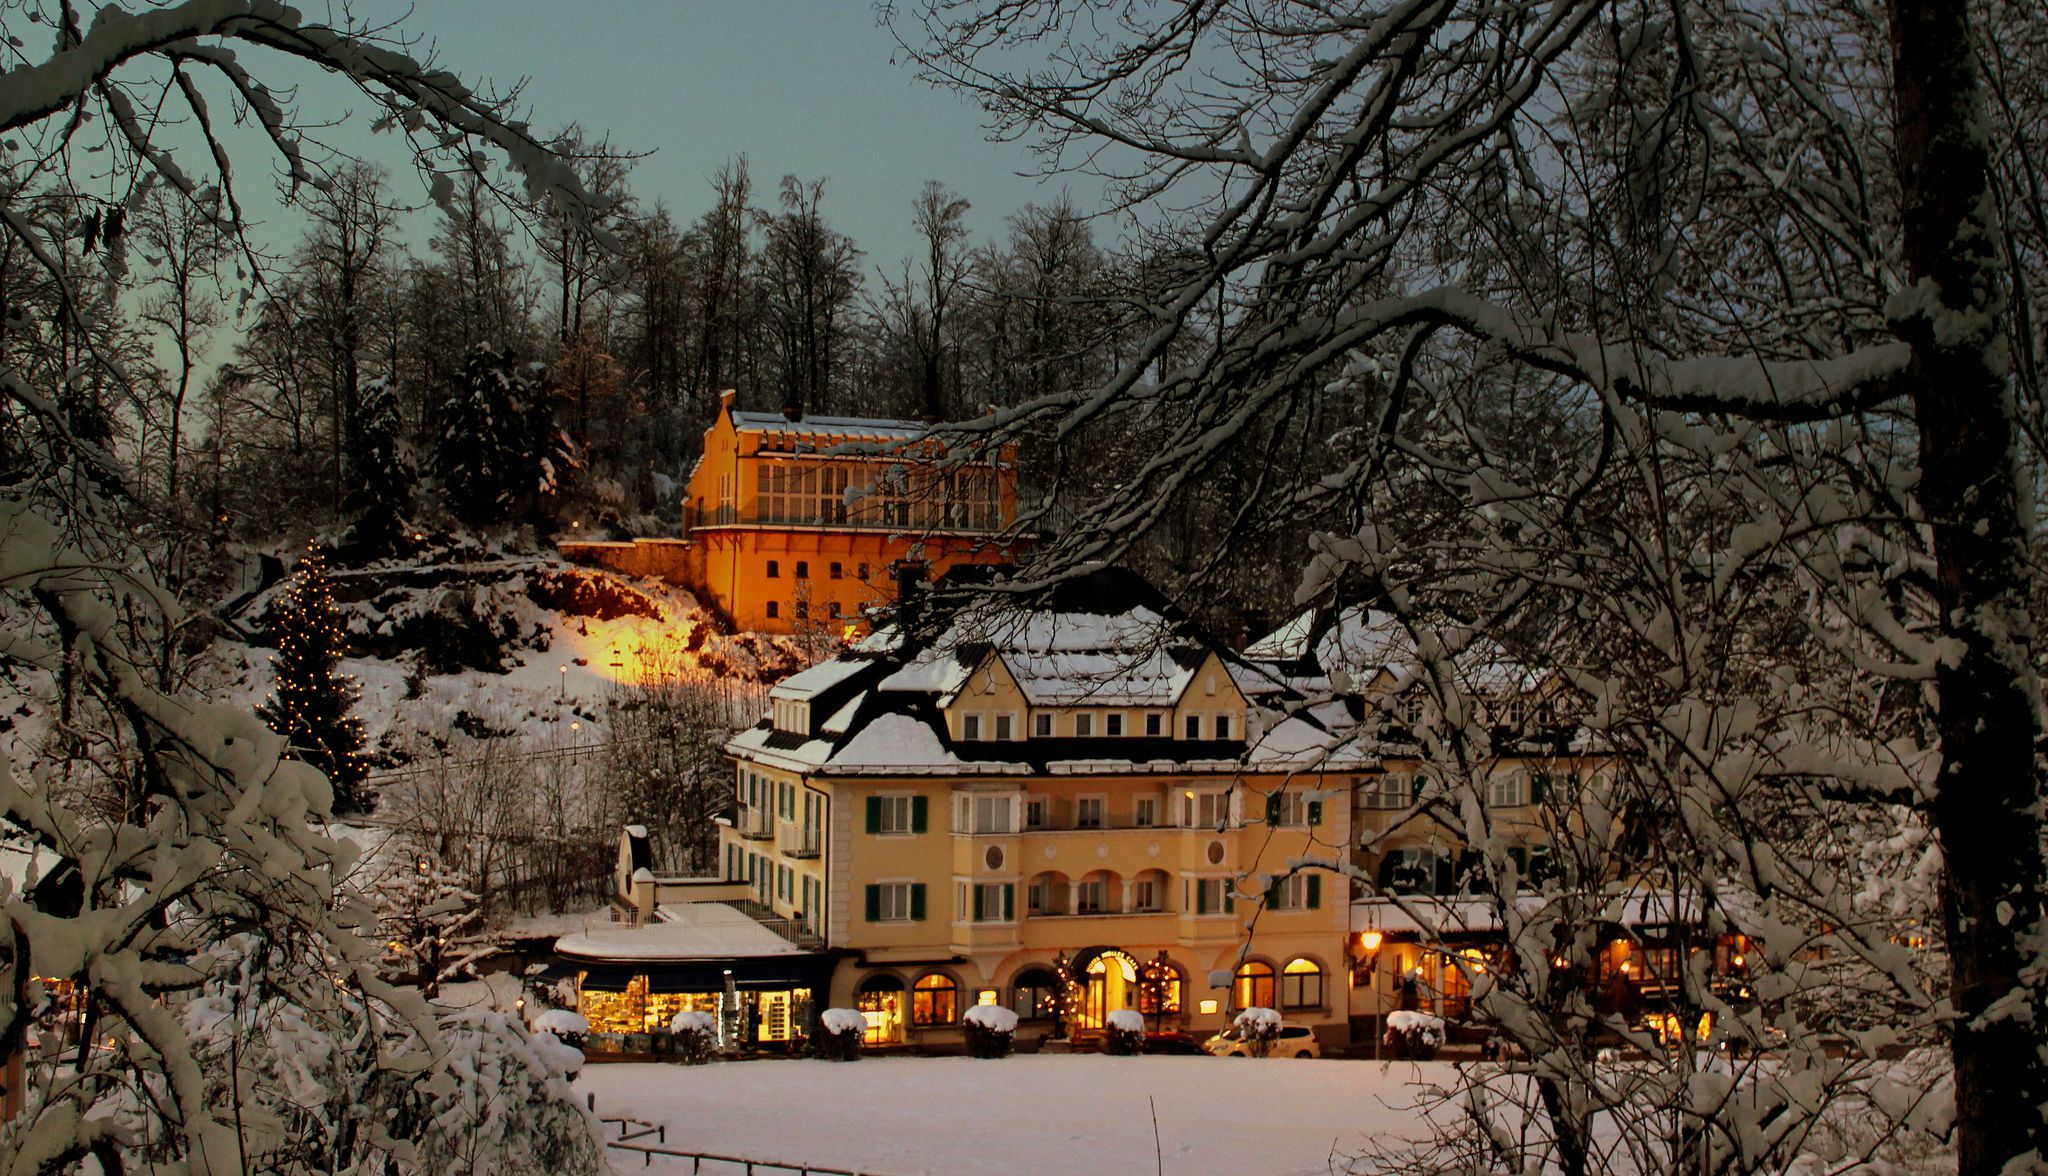 General 2048x1176 architecture castle nature landscape trees forest snow winter branch lights hotel Germany